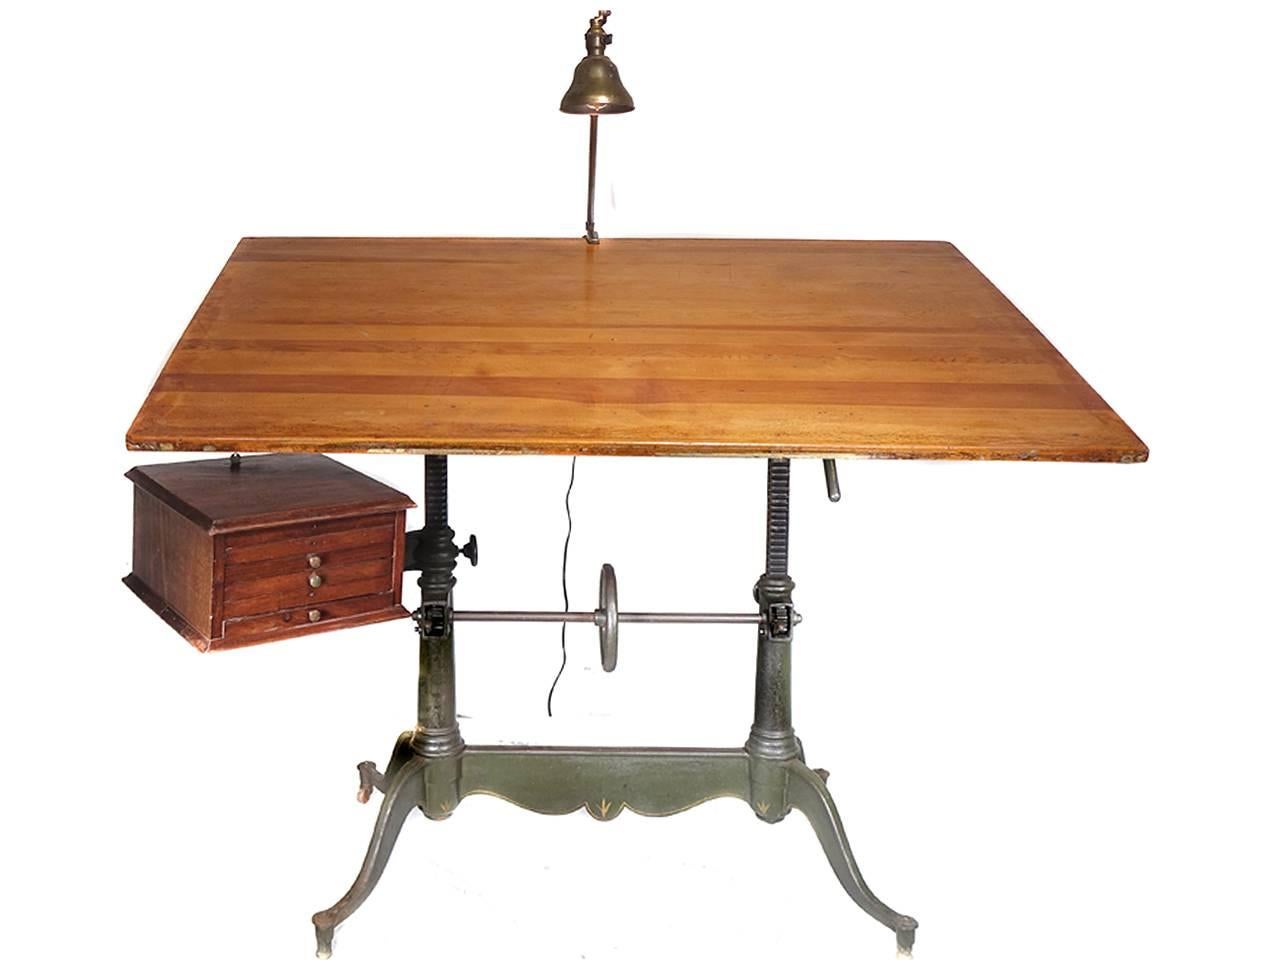 This is an exceptional antique cast iron double pedestal drafting table by Keuffel & Esser, with a beautiful detailed base having a centre wheel for height adjustment, and a locking mechanism for tilt adjustment. This handsome table also has the